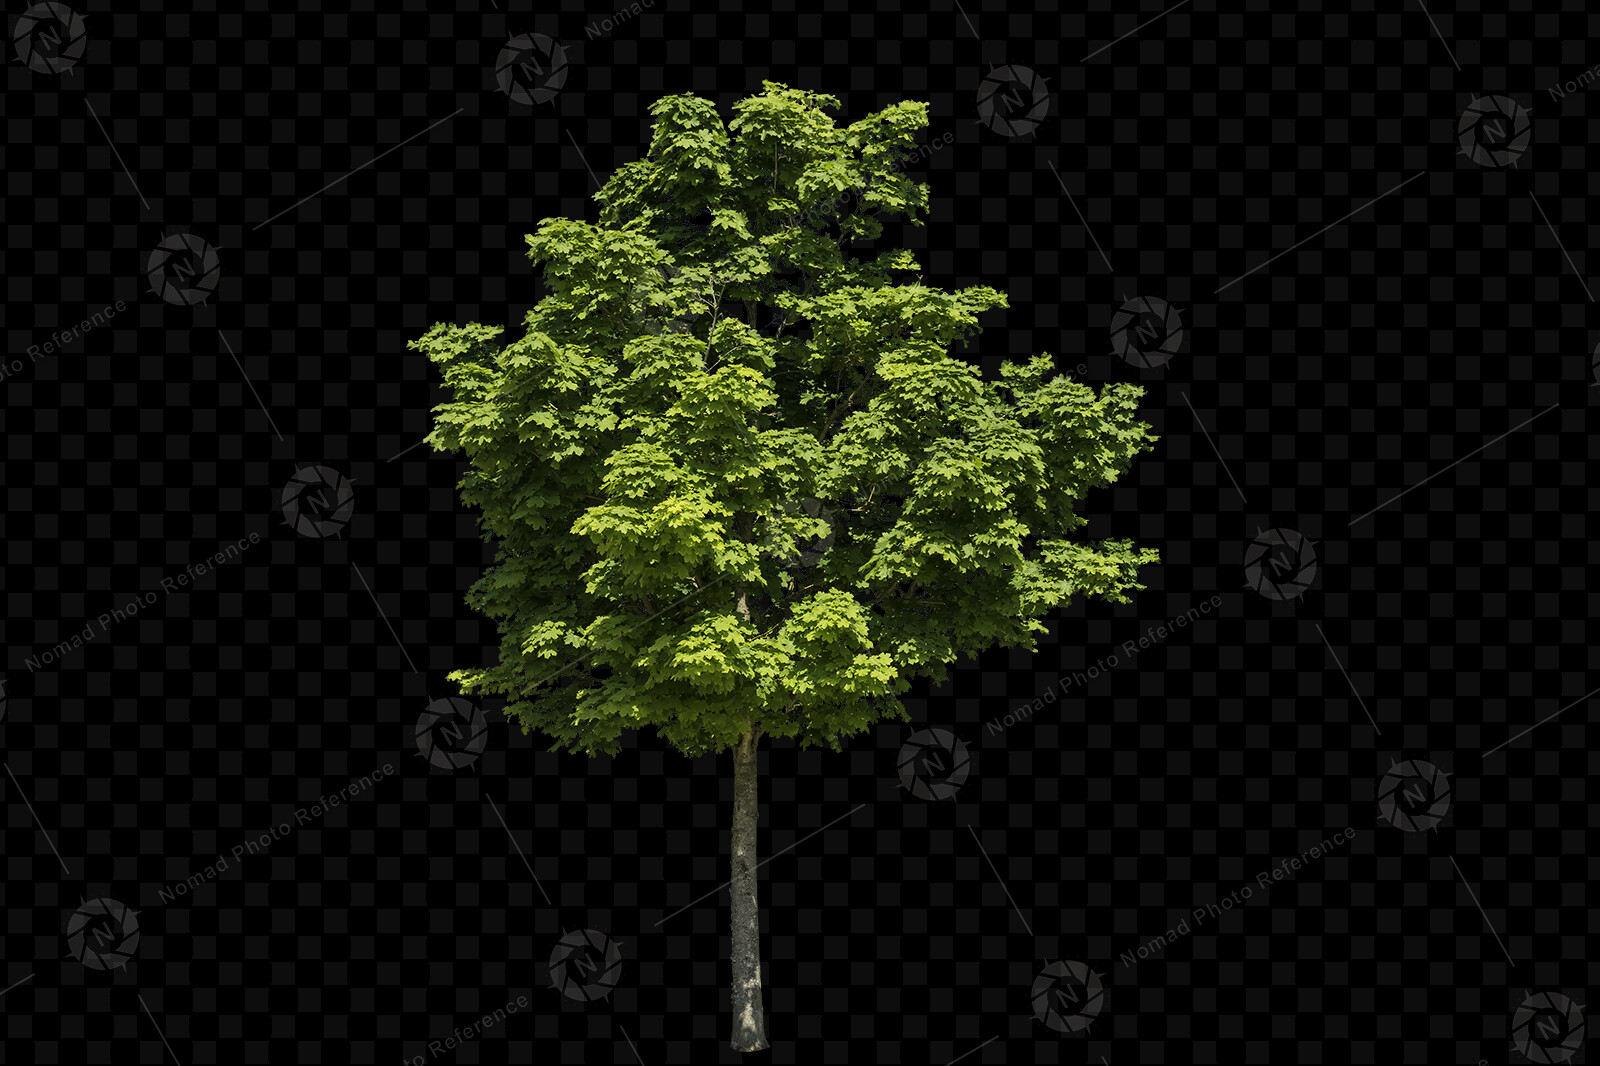 From the PNG Photo Pack: Trees

https://www.artstation.com/a/18370312